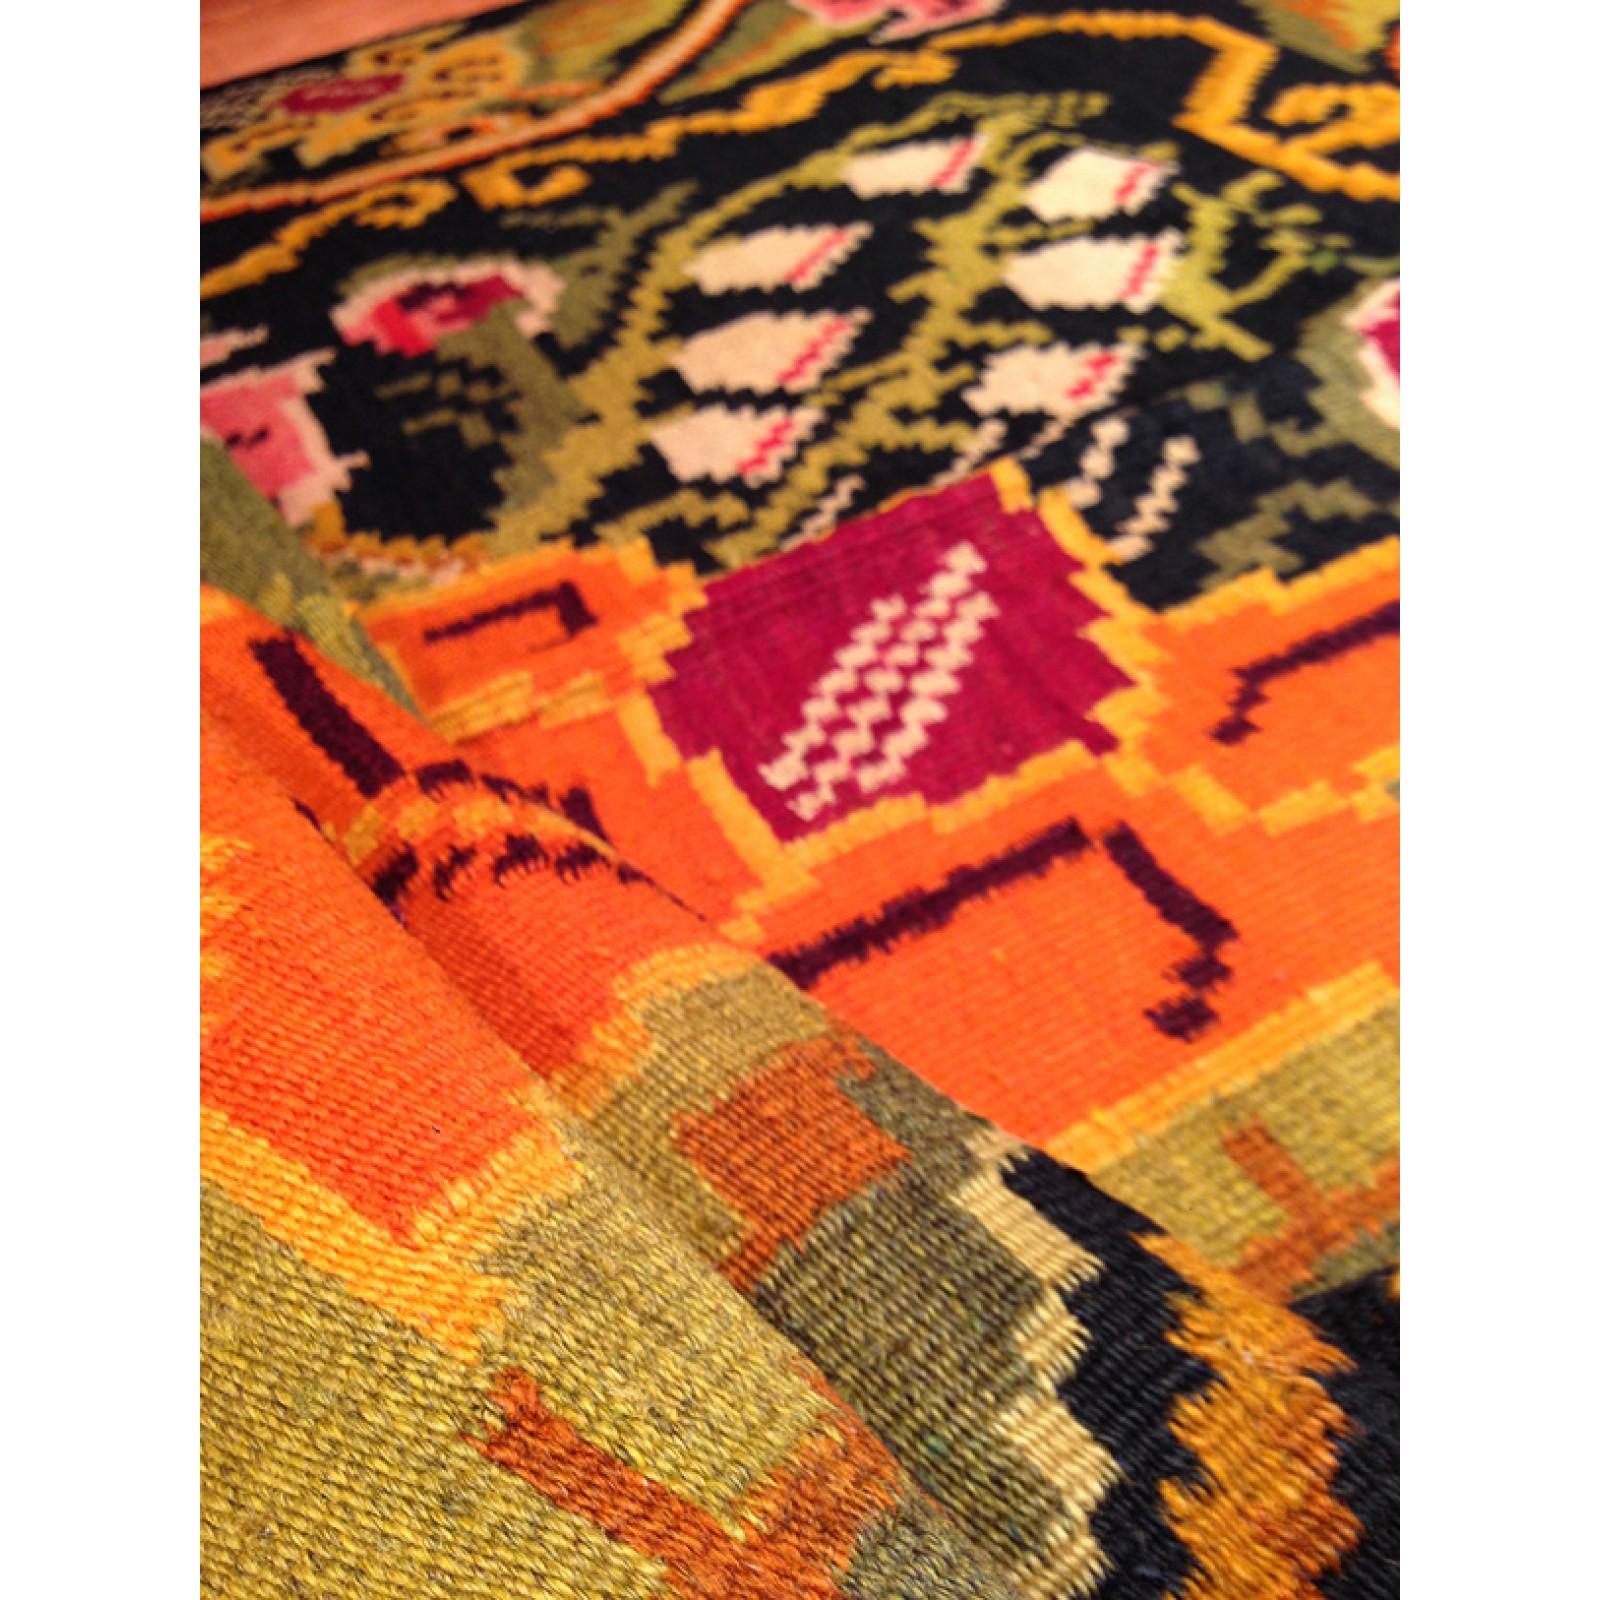 This is a Vintage Old Bessarabian Kilim Rug from Moldova with a rare and beautiful color composition.

Today it is a landlocked country in Eastern Europe, bordering Romania and Ukraine. Although it is now an independent country, it has been ruled by